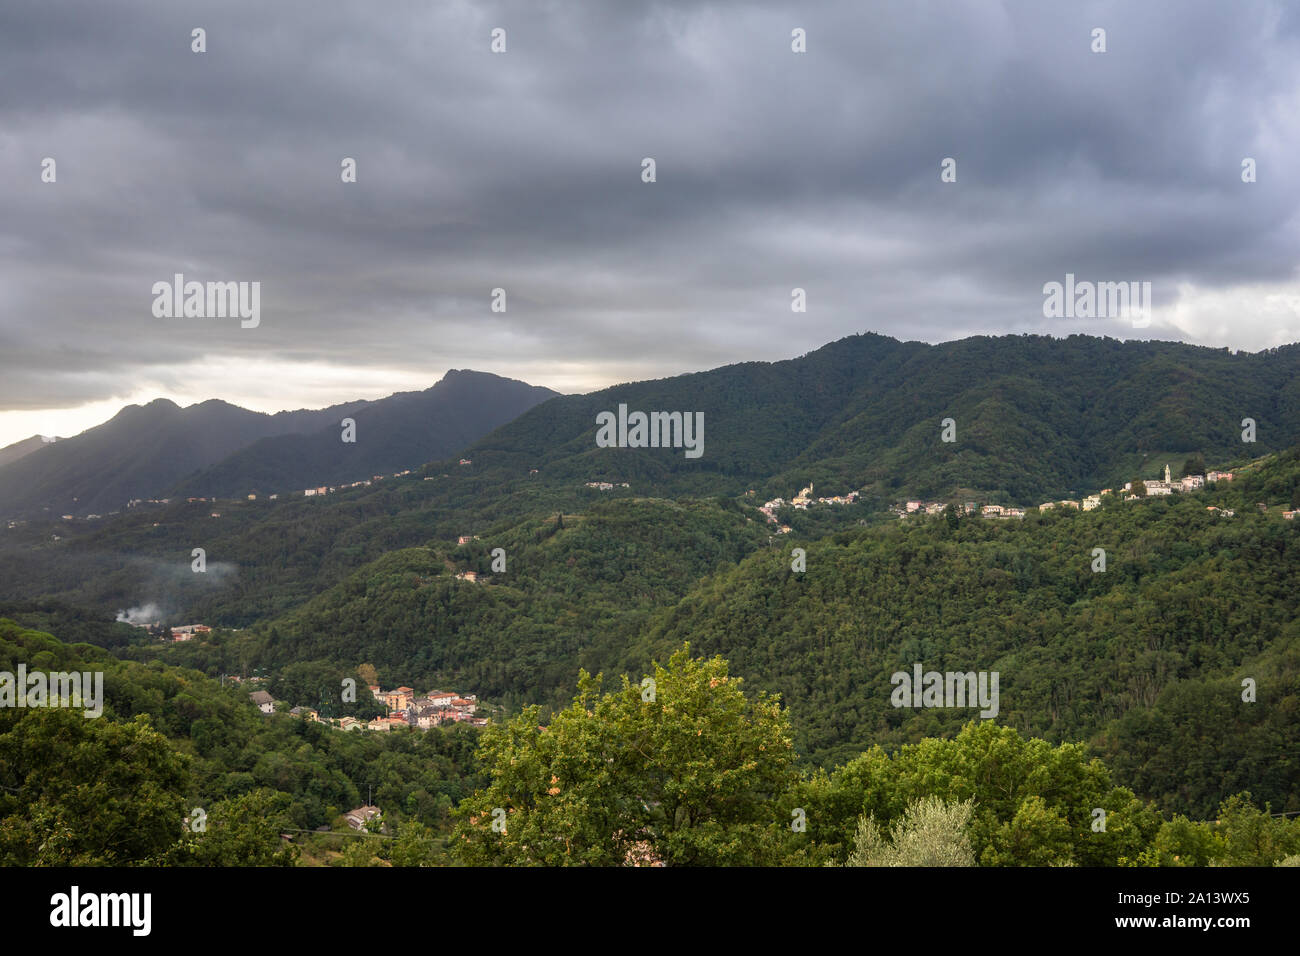 Landscape of the Apennines with villages and green dense forest in Liguria, Italy Stock Photo